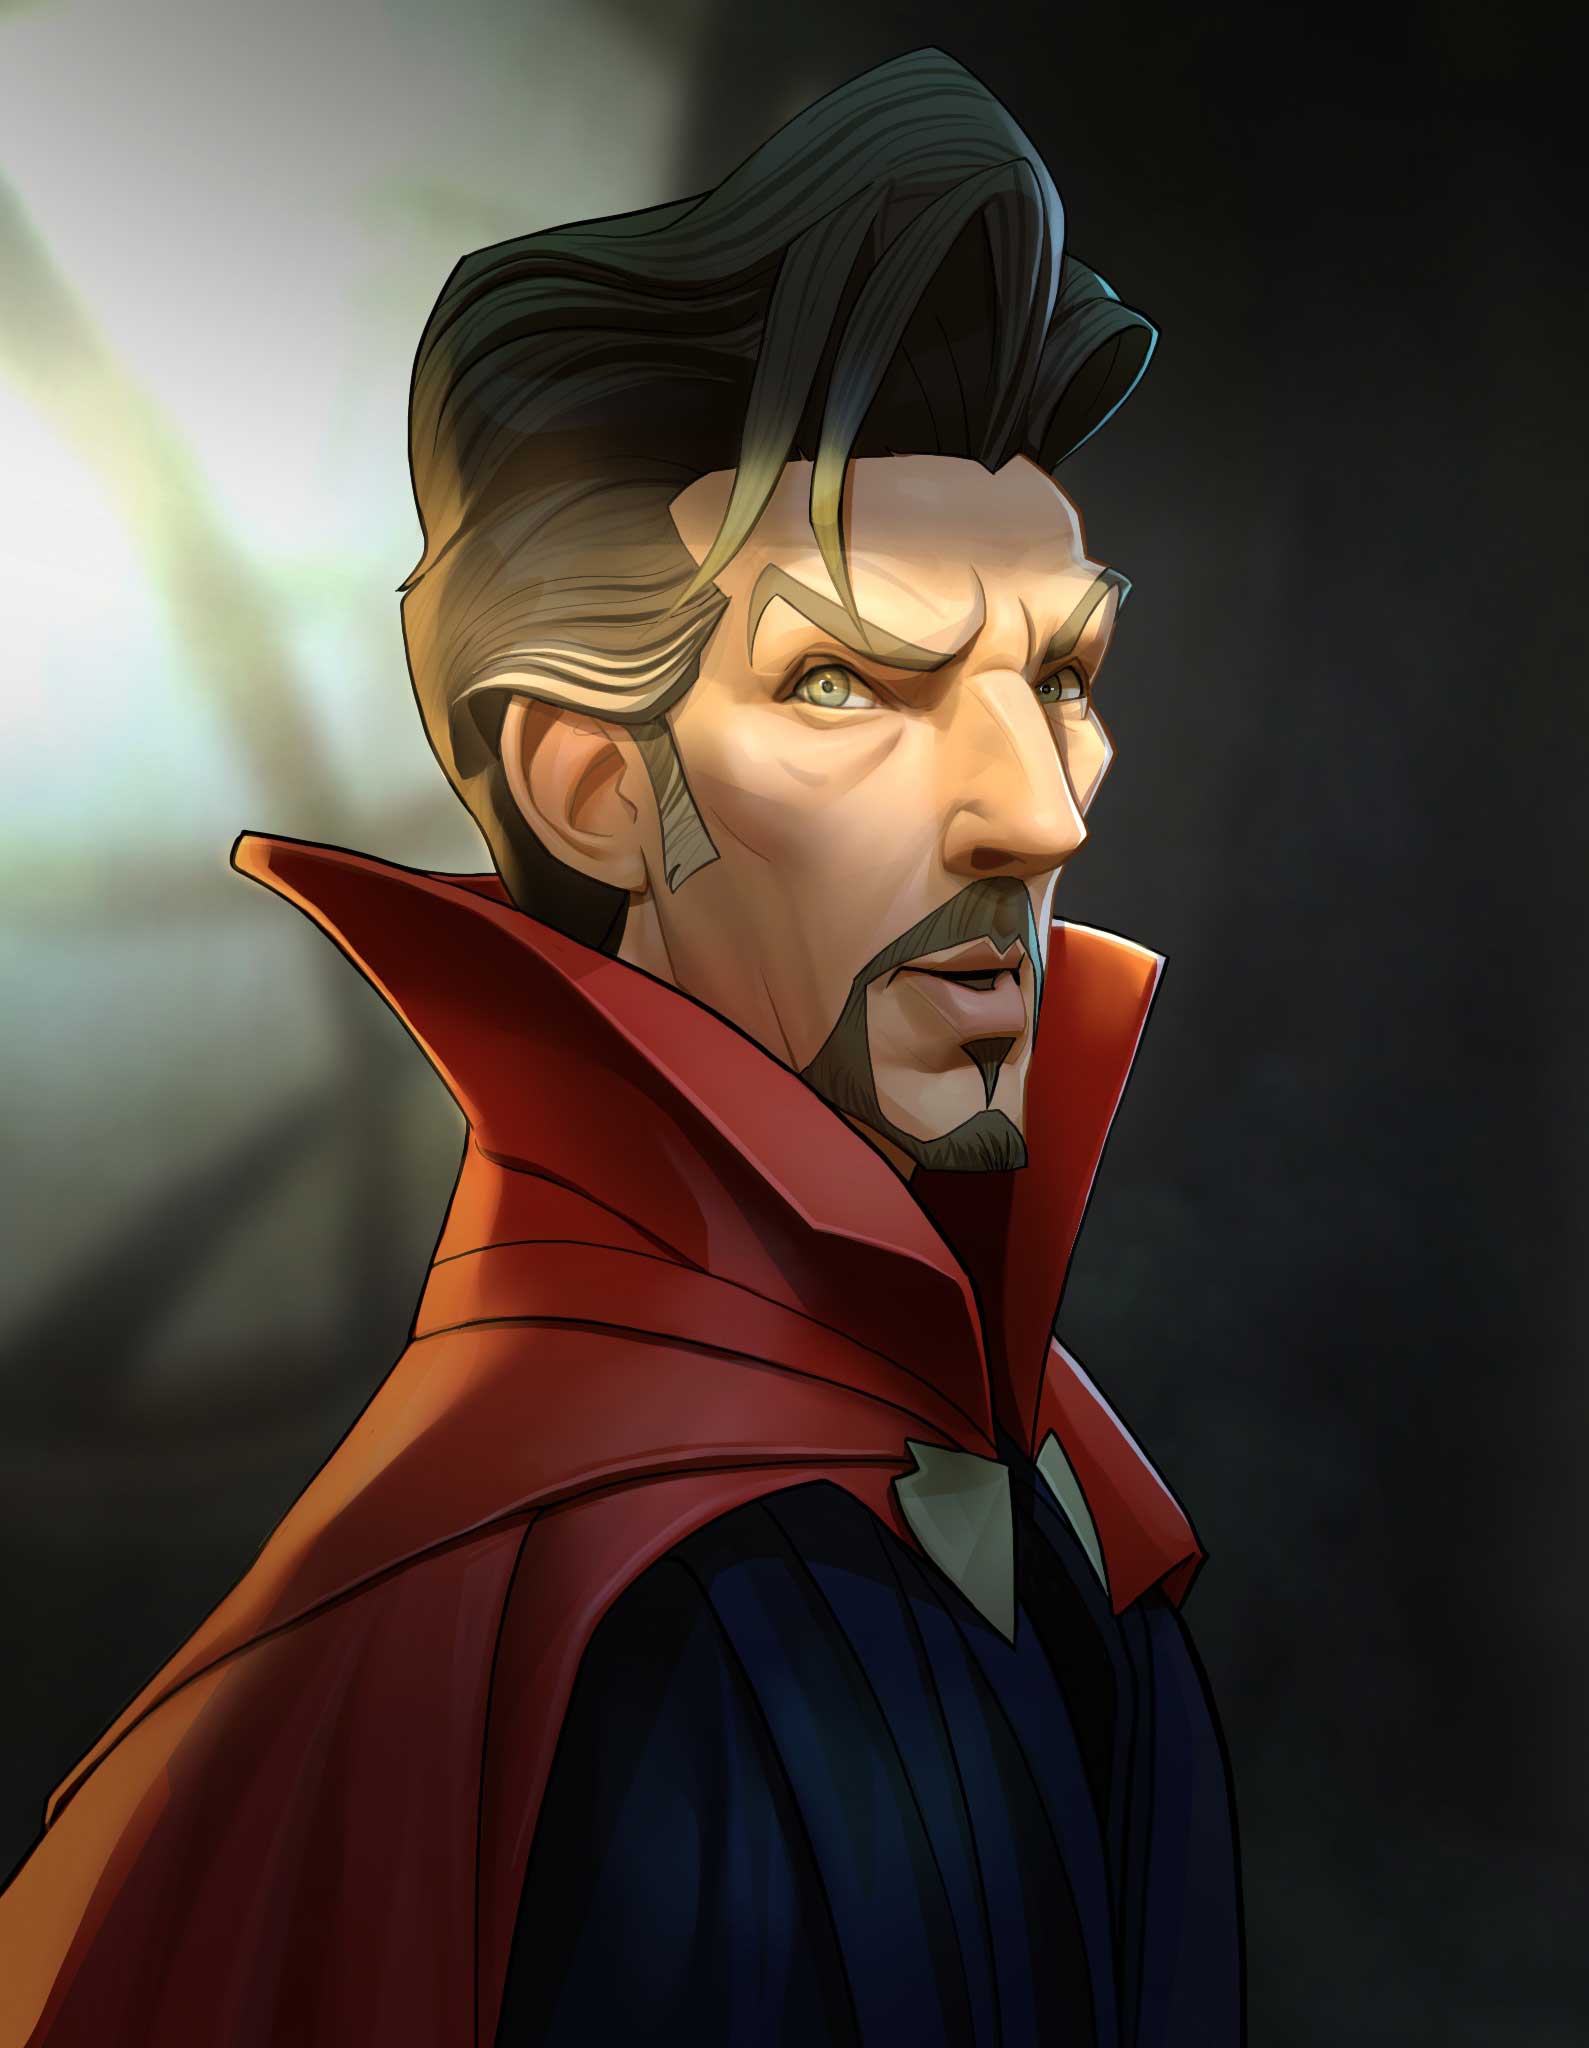 Dr Strange Caricature Cartoon by Xi Ding